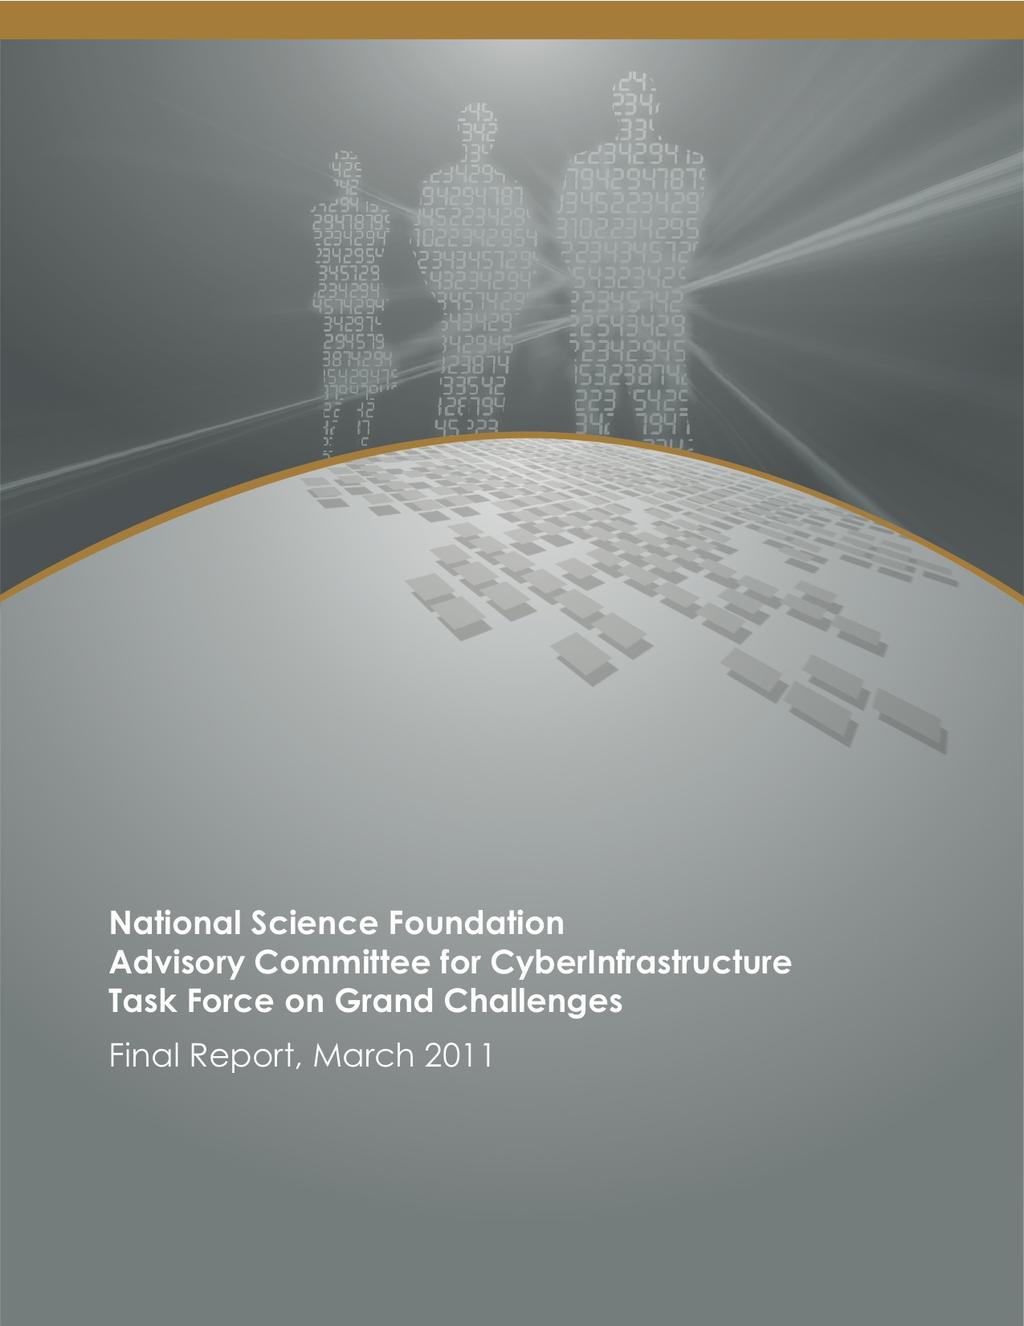 Cyberinfrastructure Framework for 21st Century Science and Engineering (CIF21) Cross-NSF portfolio of activities to provide integrated cyber resources that will enable new multidisciplinary research